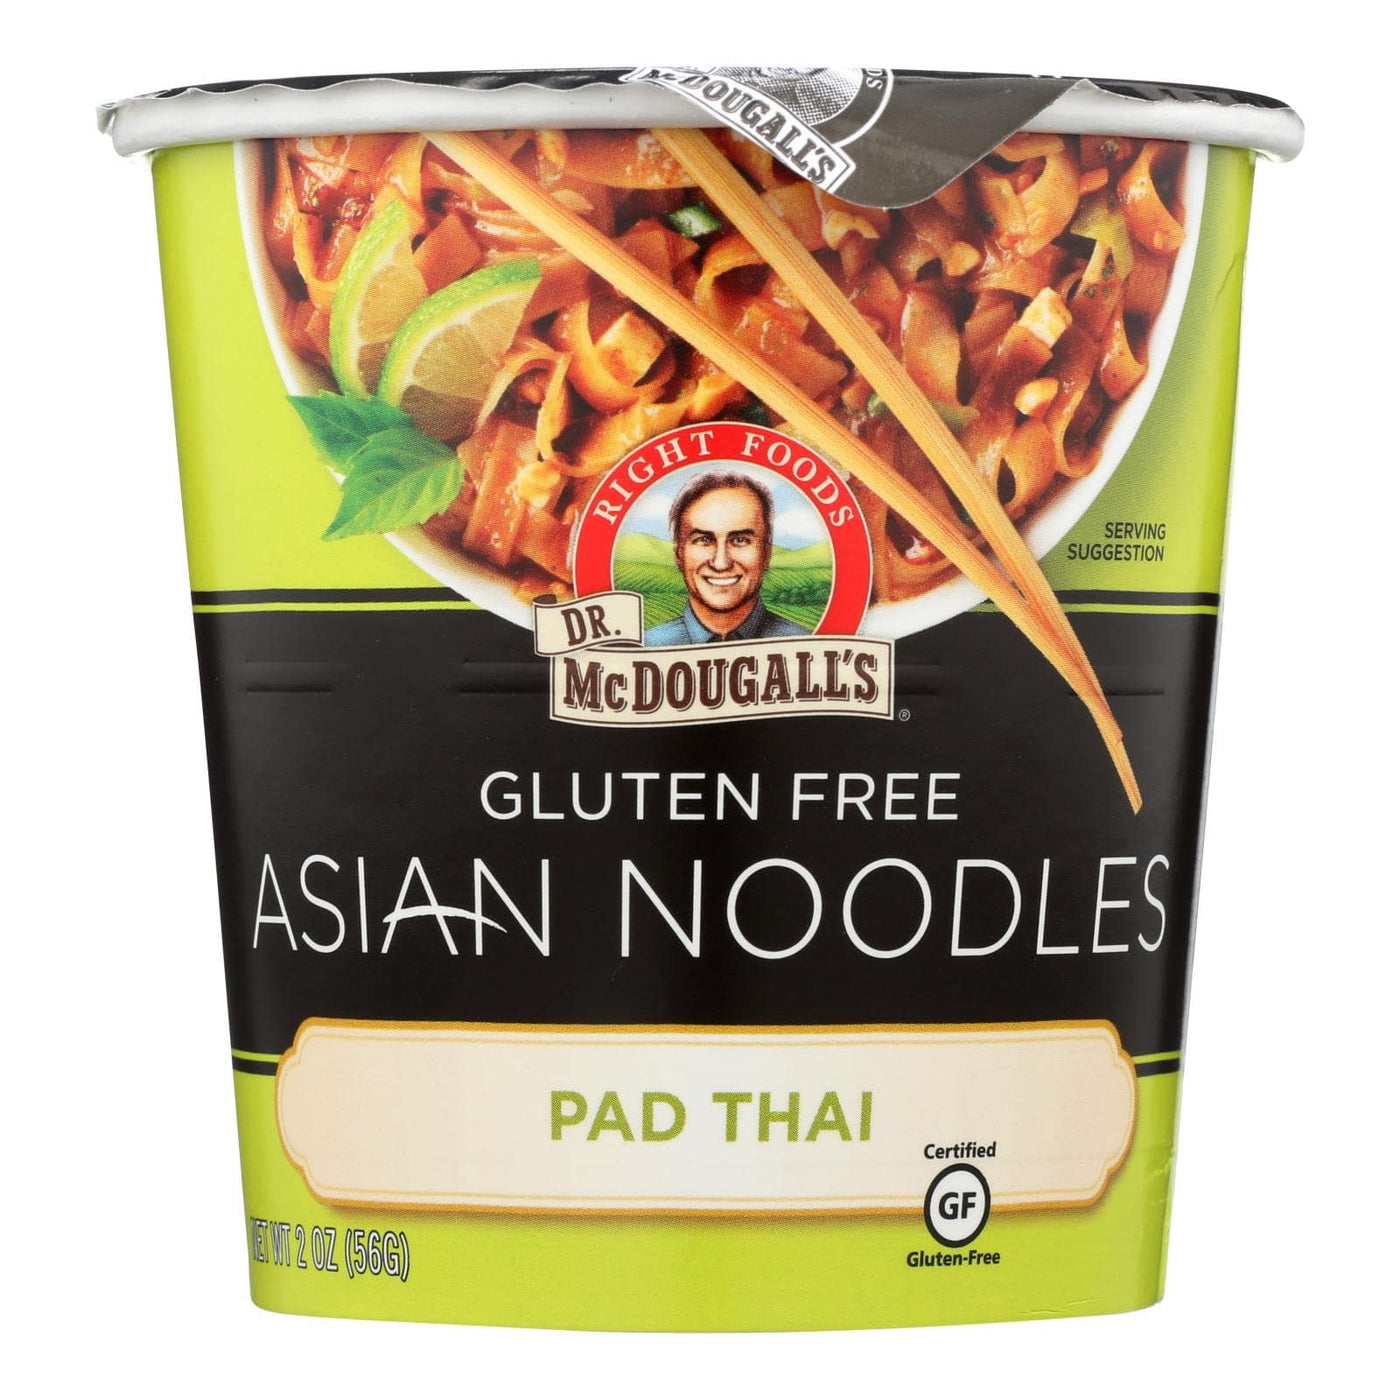 Buy Dr. Mcdougall's Pad Thai Asian Noodles - Case Of 6 - 2 Oz.  at OnlyNaturals.us